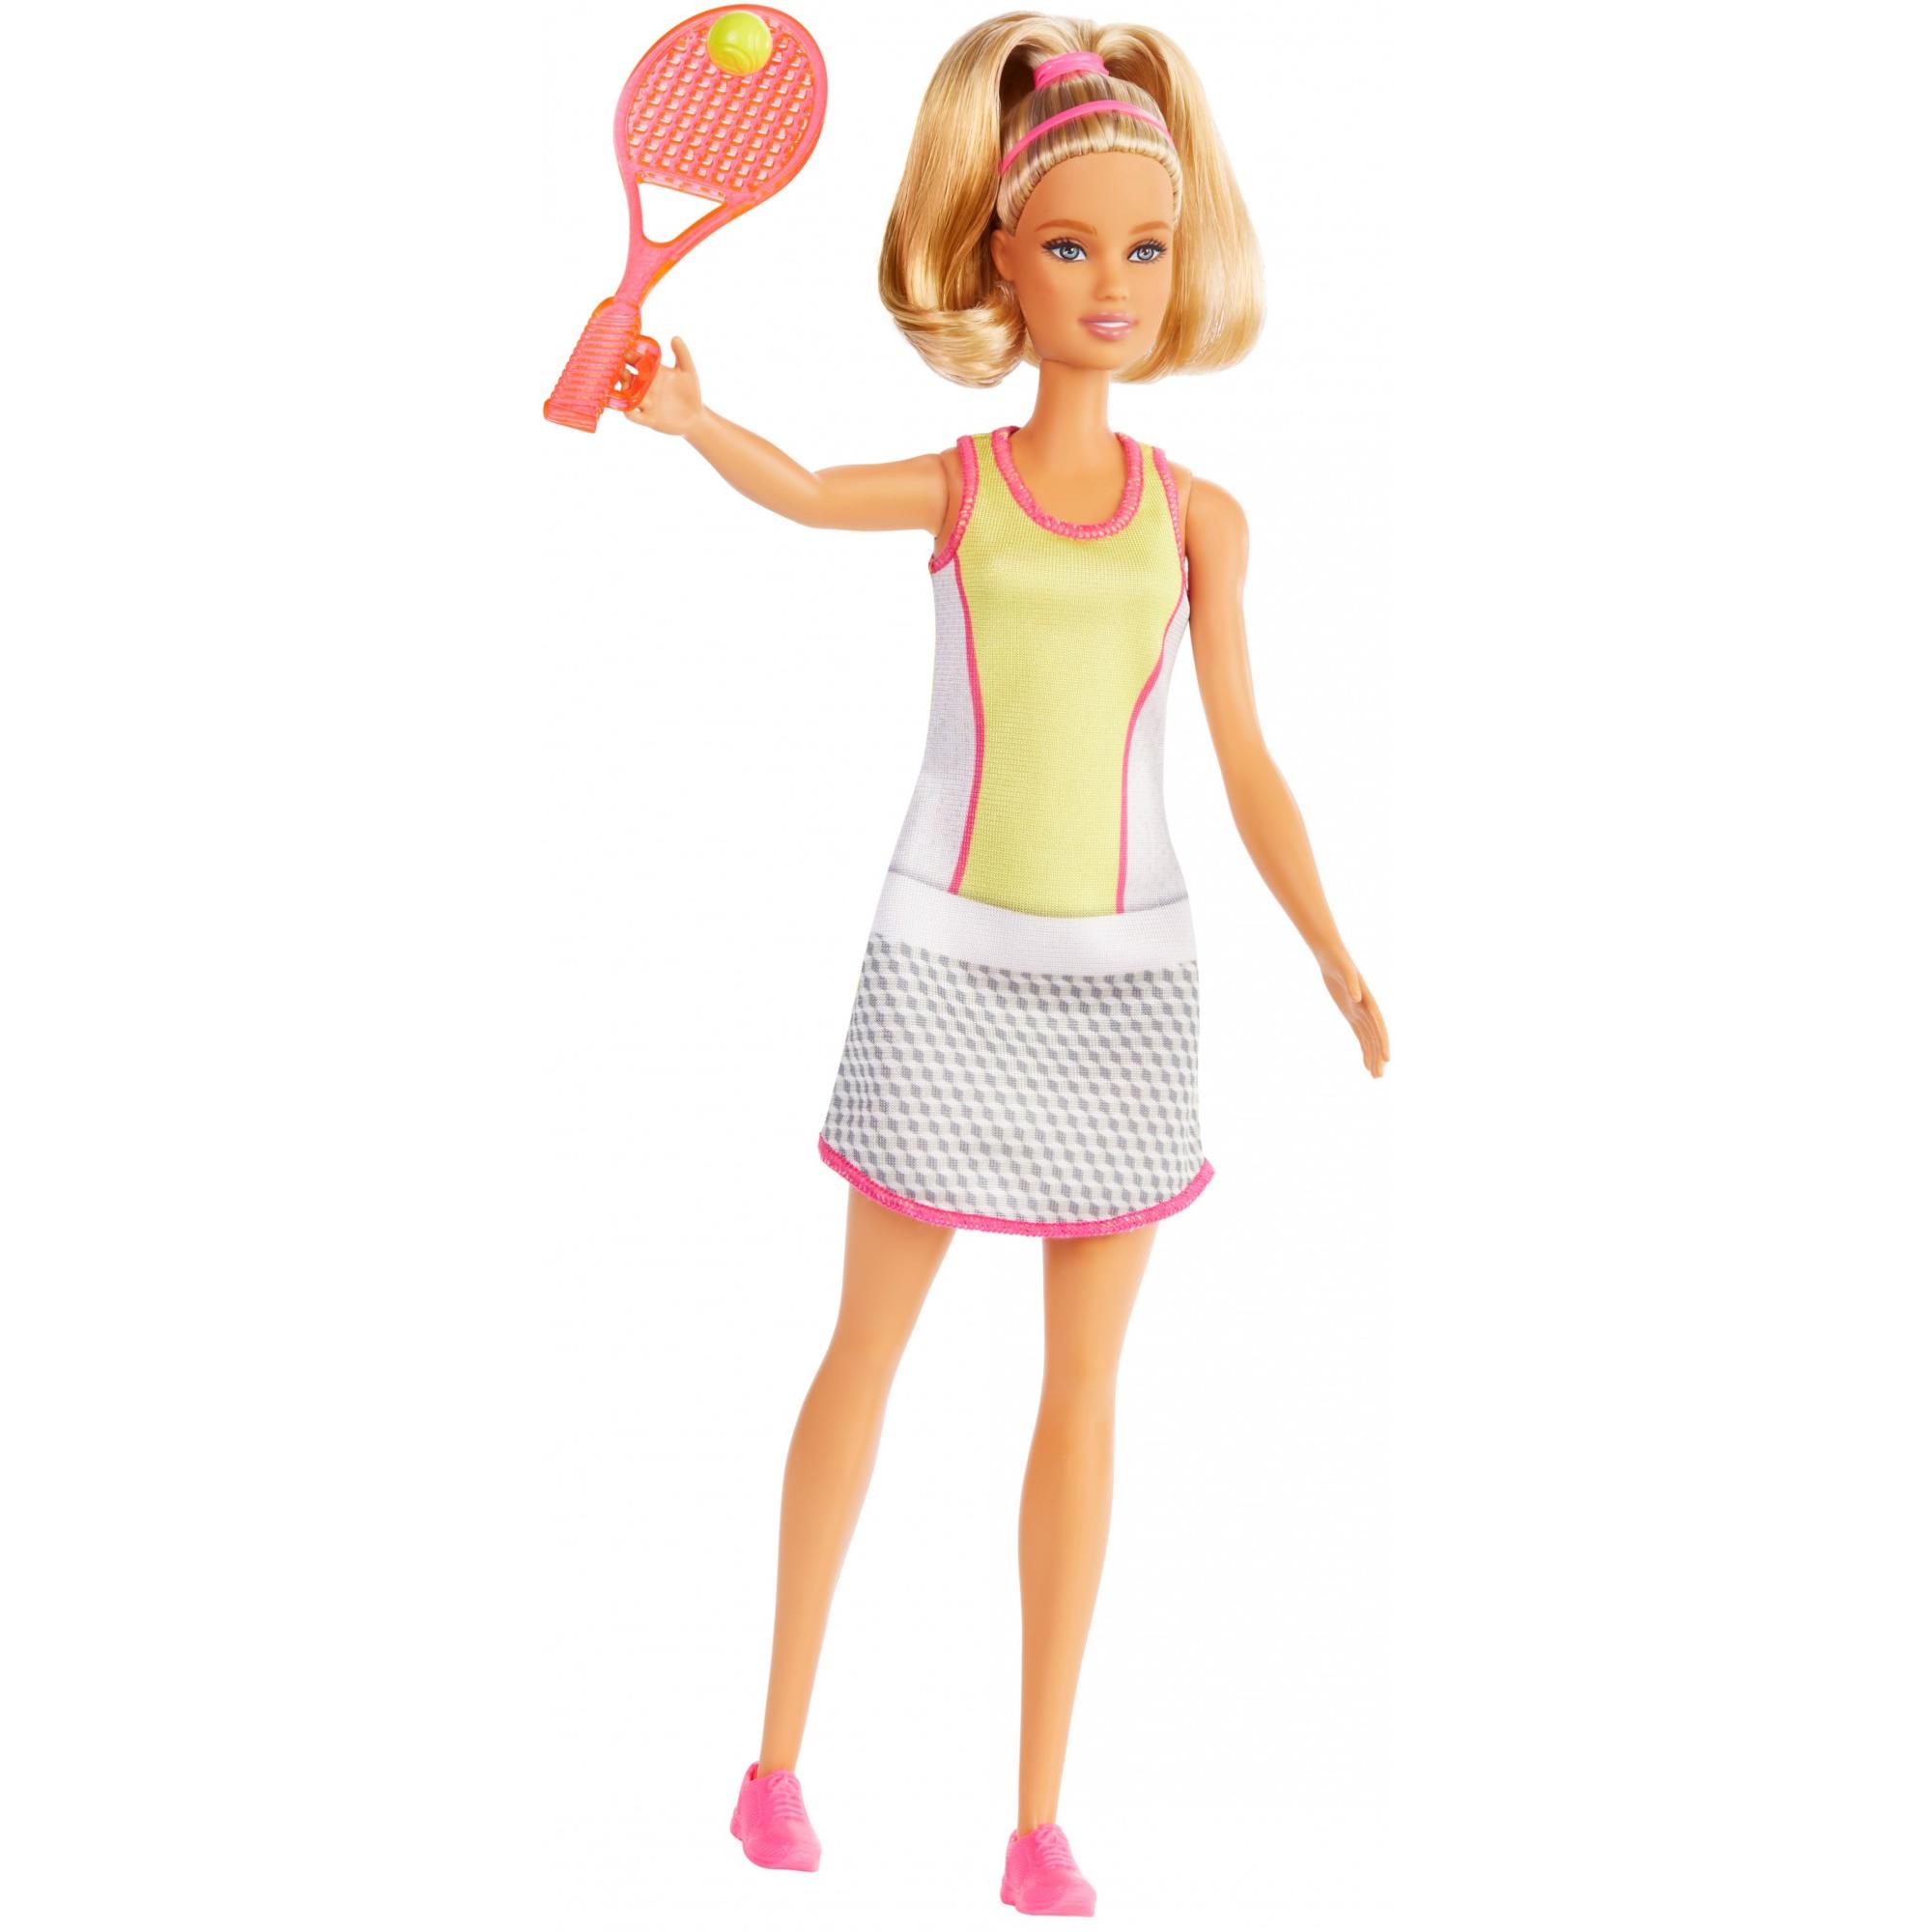 Barbie Blonde Tennis Player Doll With Tennis Outfit, Racket And Ball - image 4 of 6